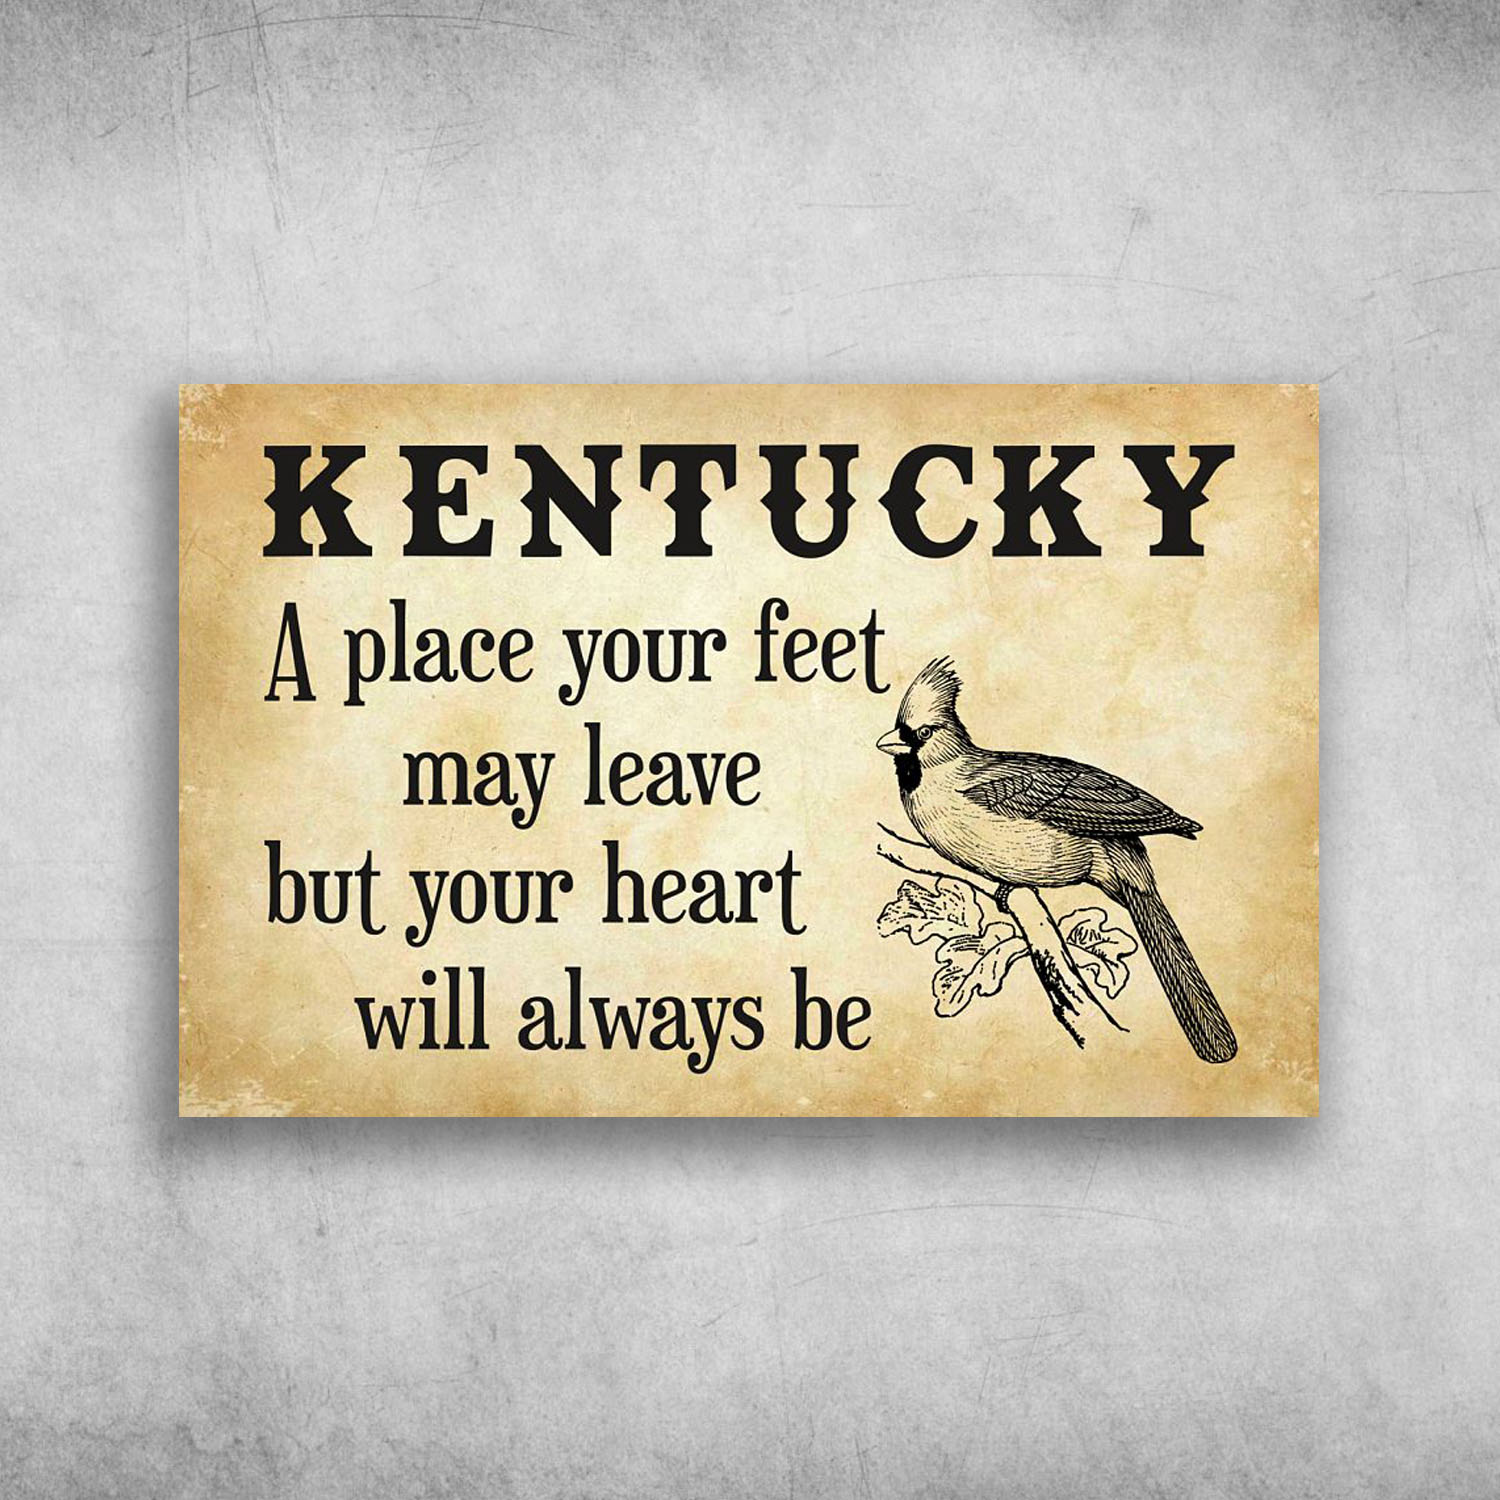 Kentucky A Place Your Feet May Leave